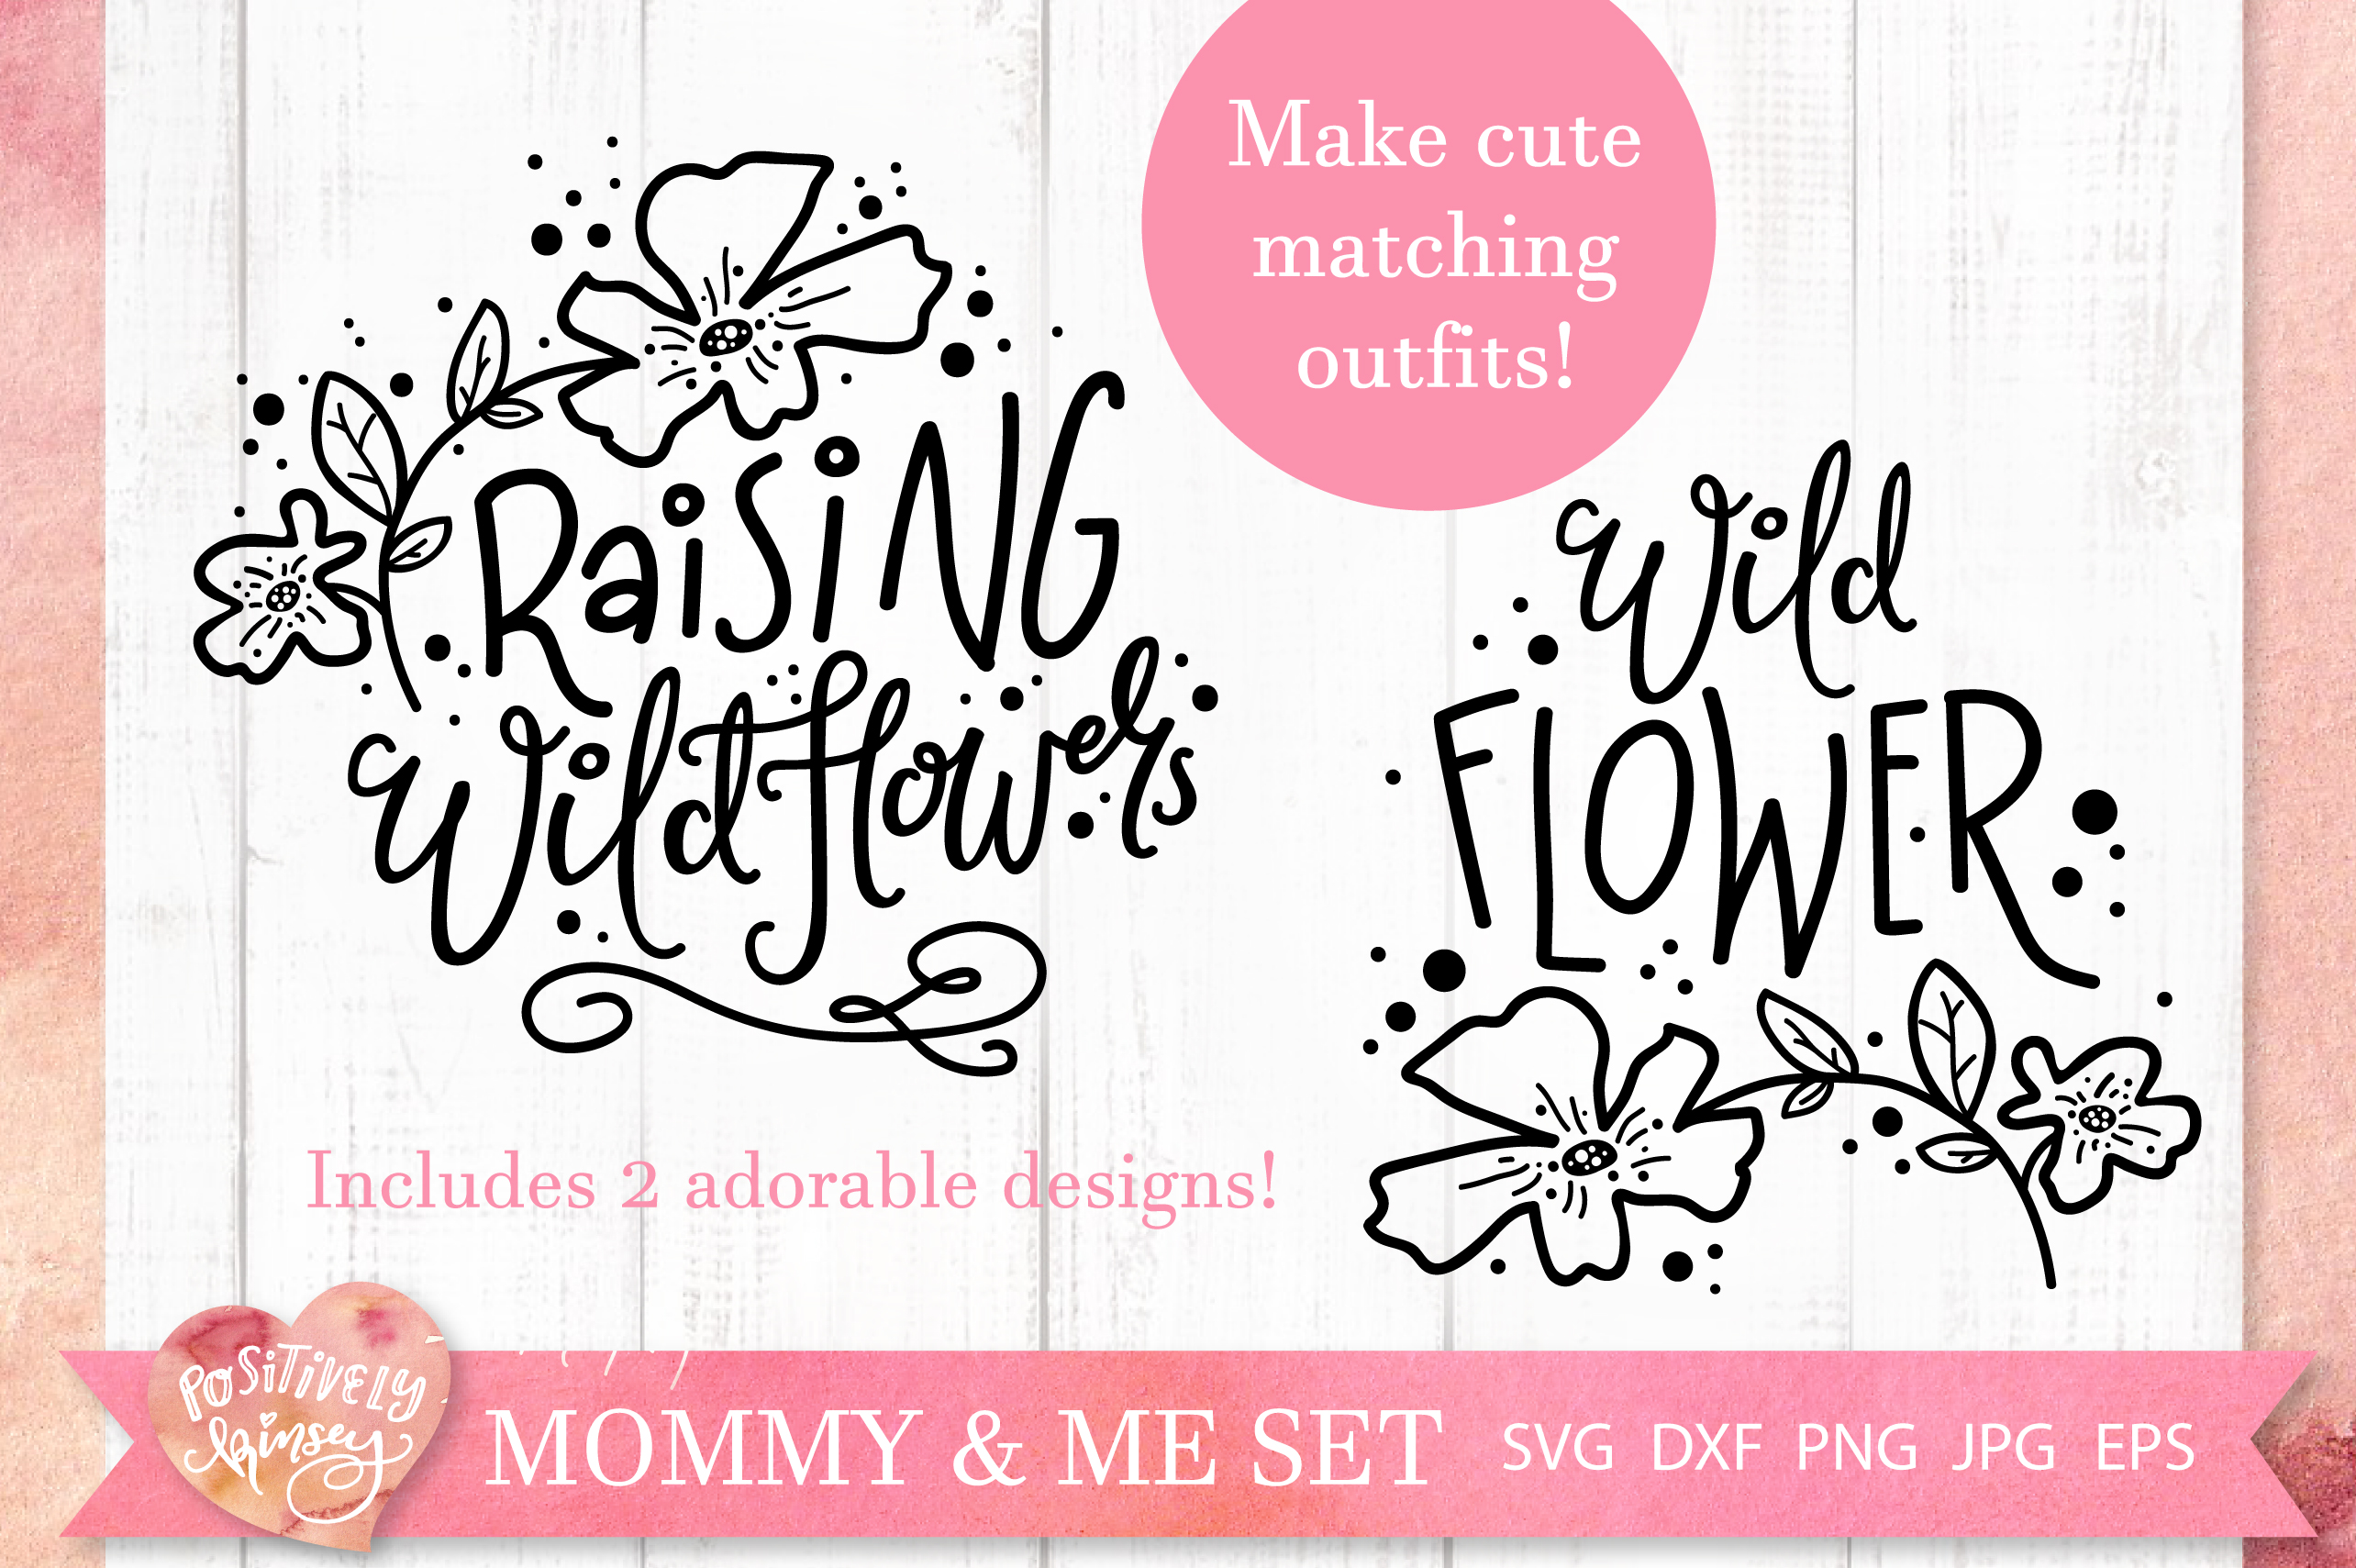 Mommy and Me SVG Raising Wildflowers PNG EPS DXF Cut Files